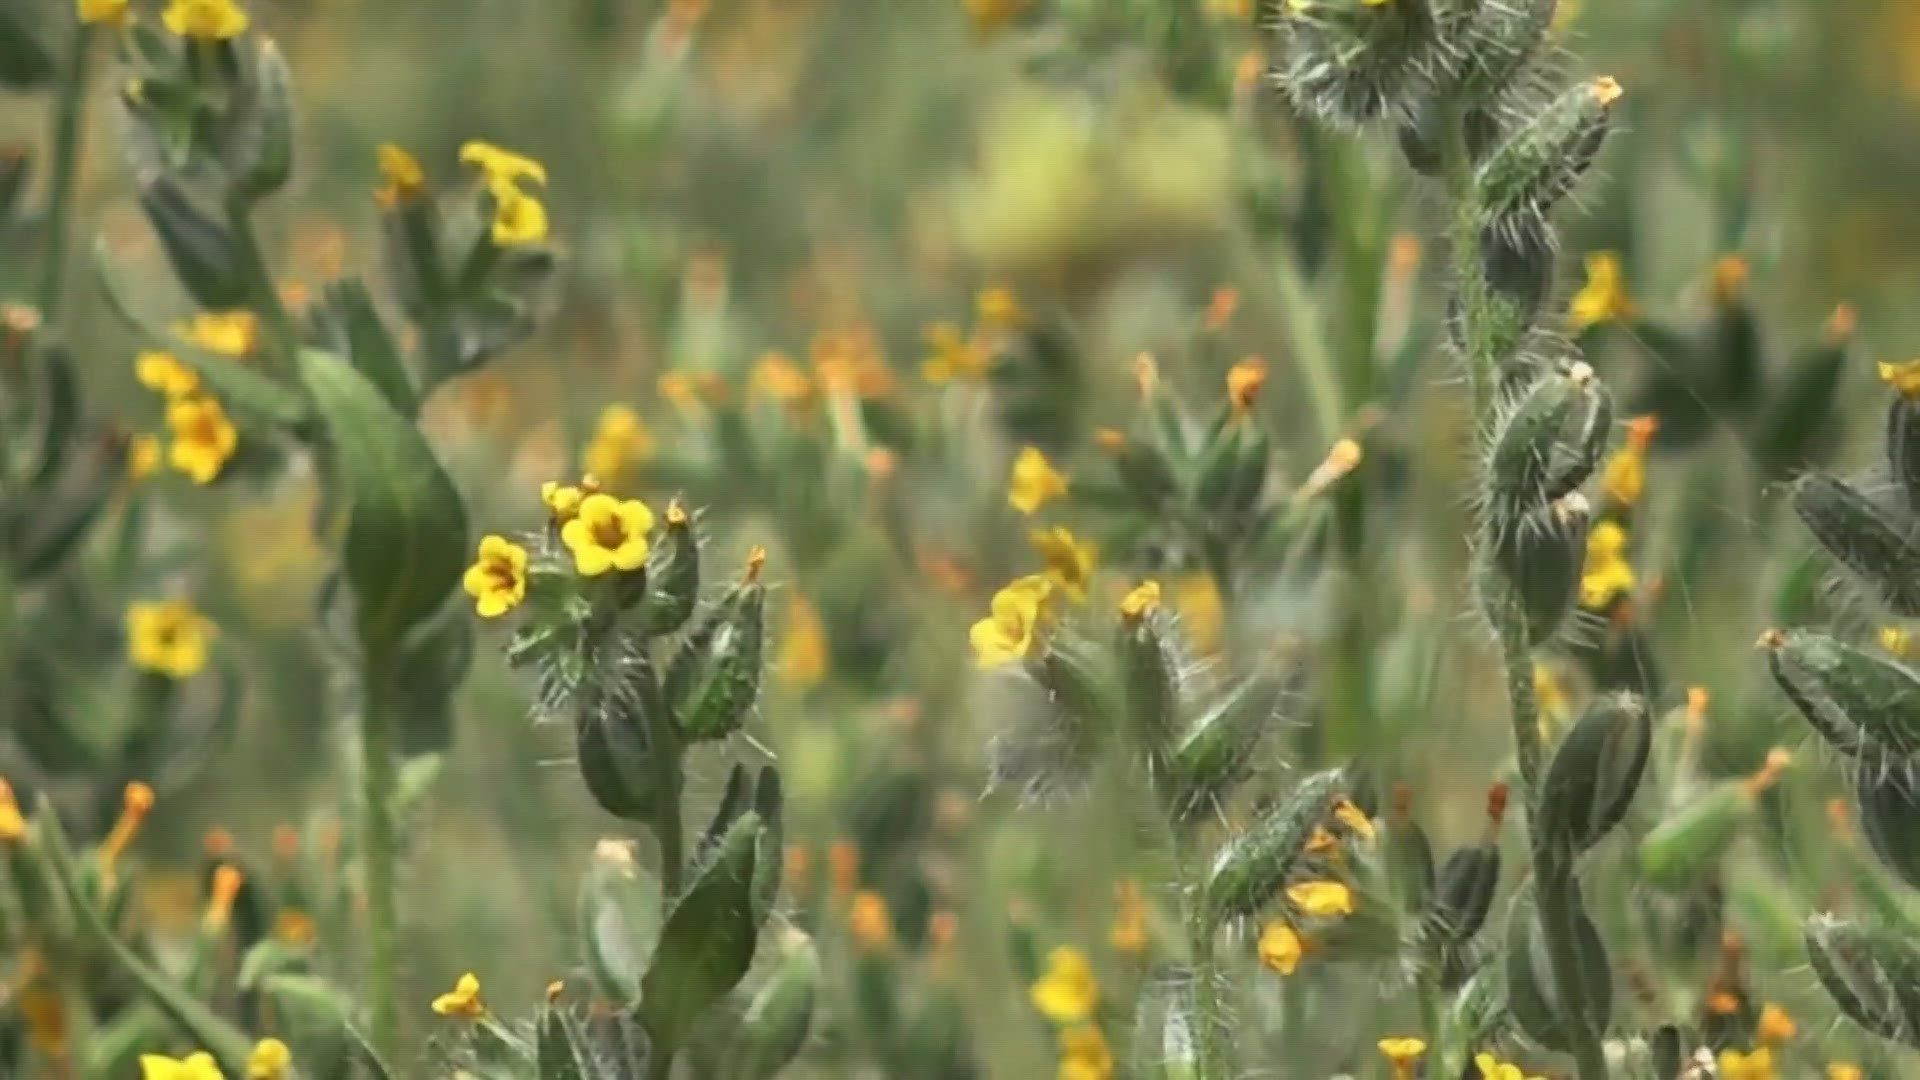 While it's impossible to predict when exactly a wildflower season will go above and beyond, environmental scientists say the odds are looking good this year.